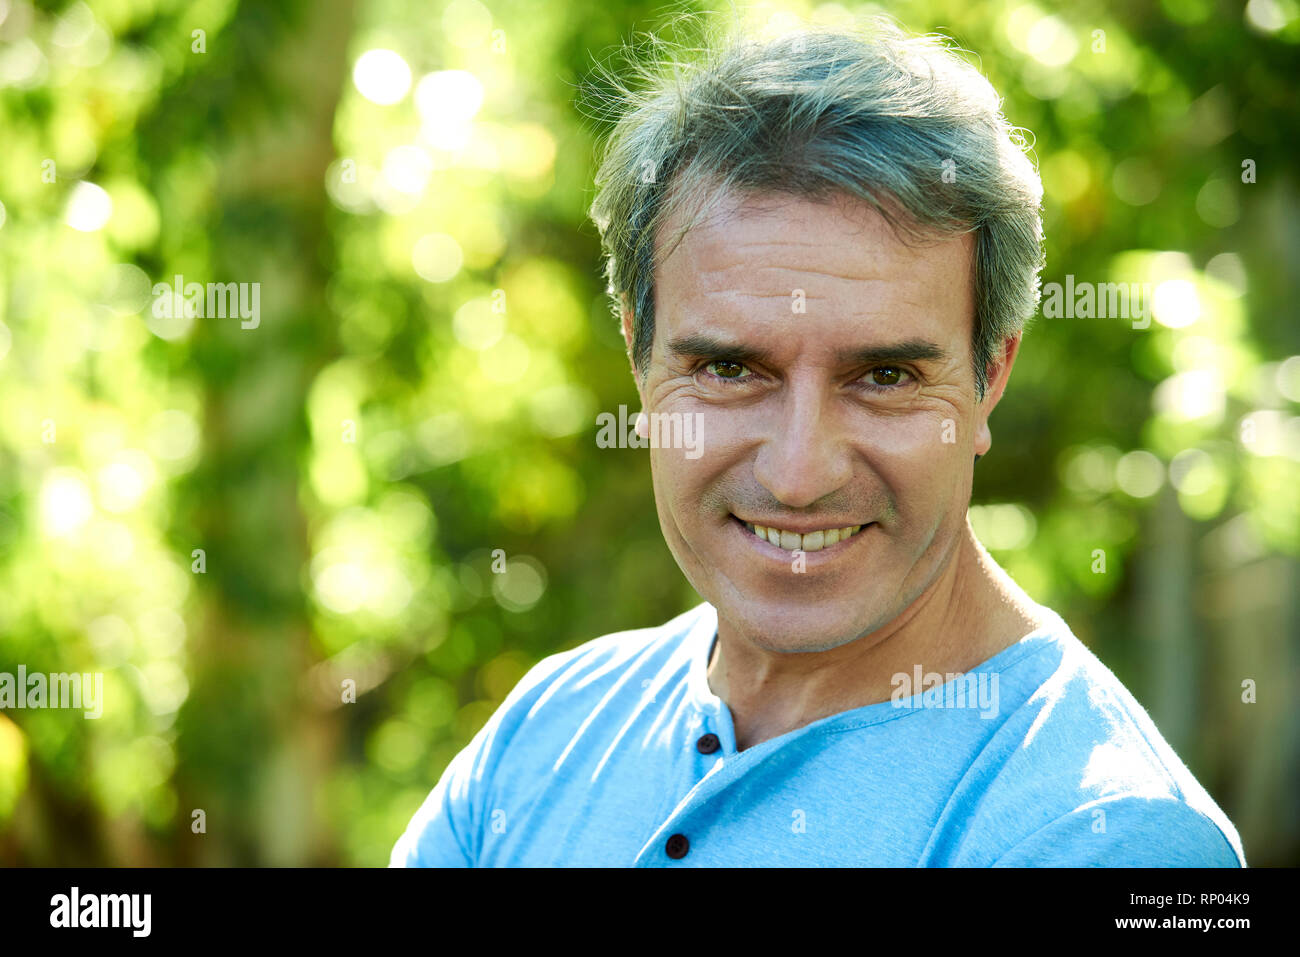 Close-up of a mature man standing outdoors Stock Photo